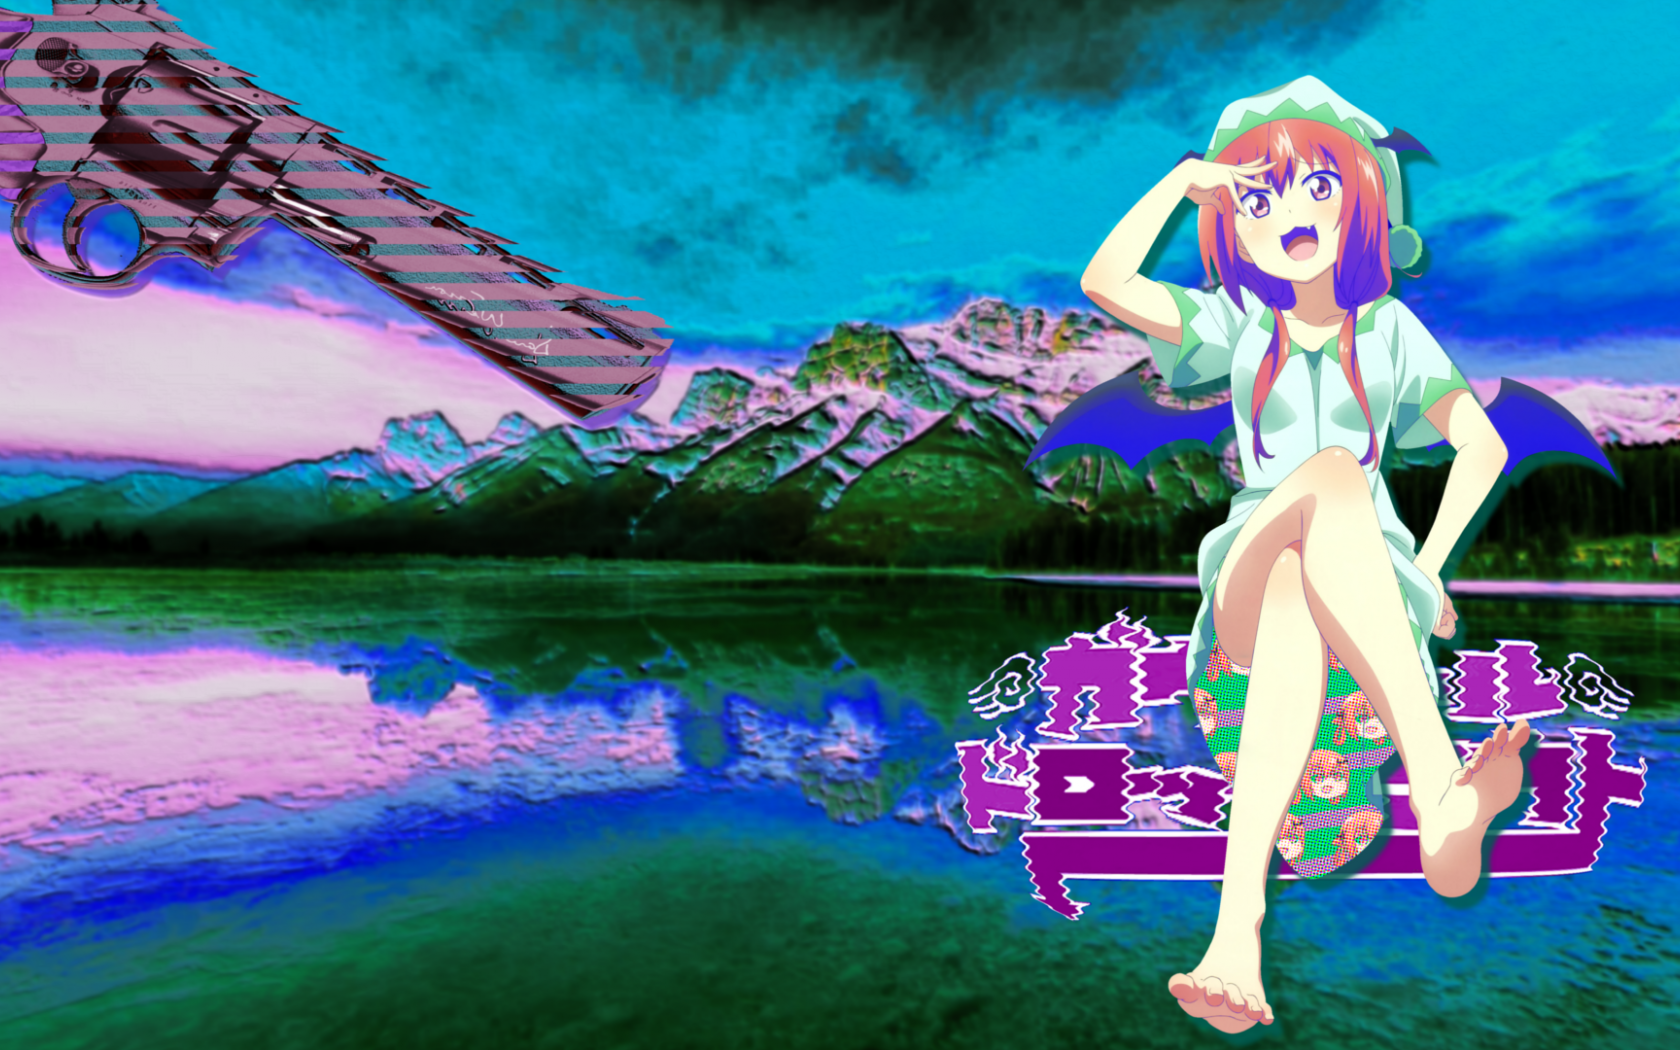 Free download a e s t h e t i c Vaoorwave Wallpaper mostly anime